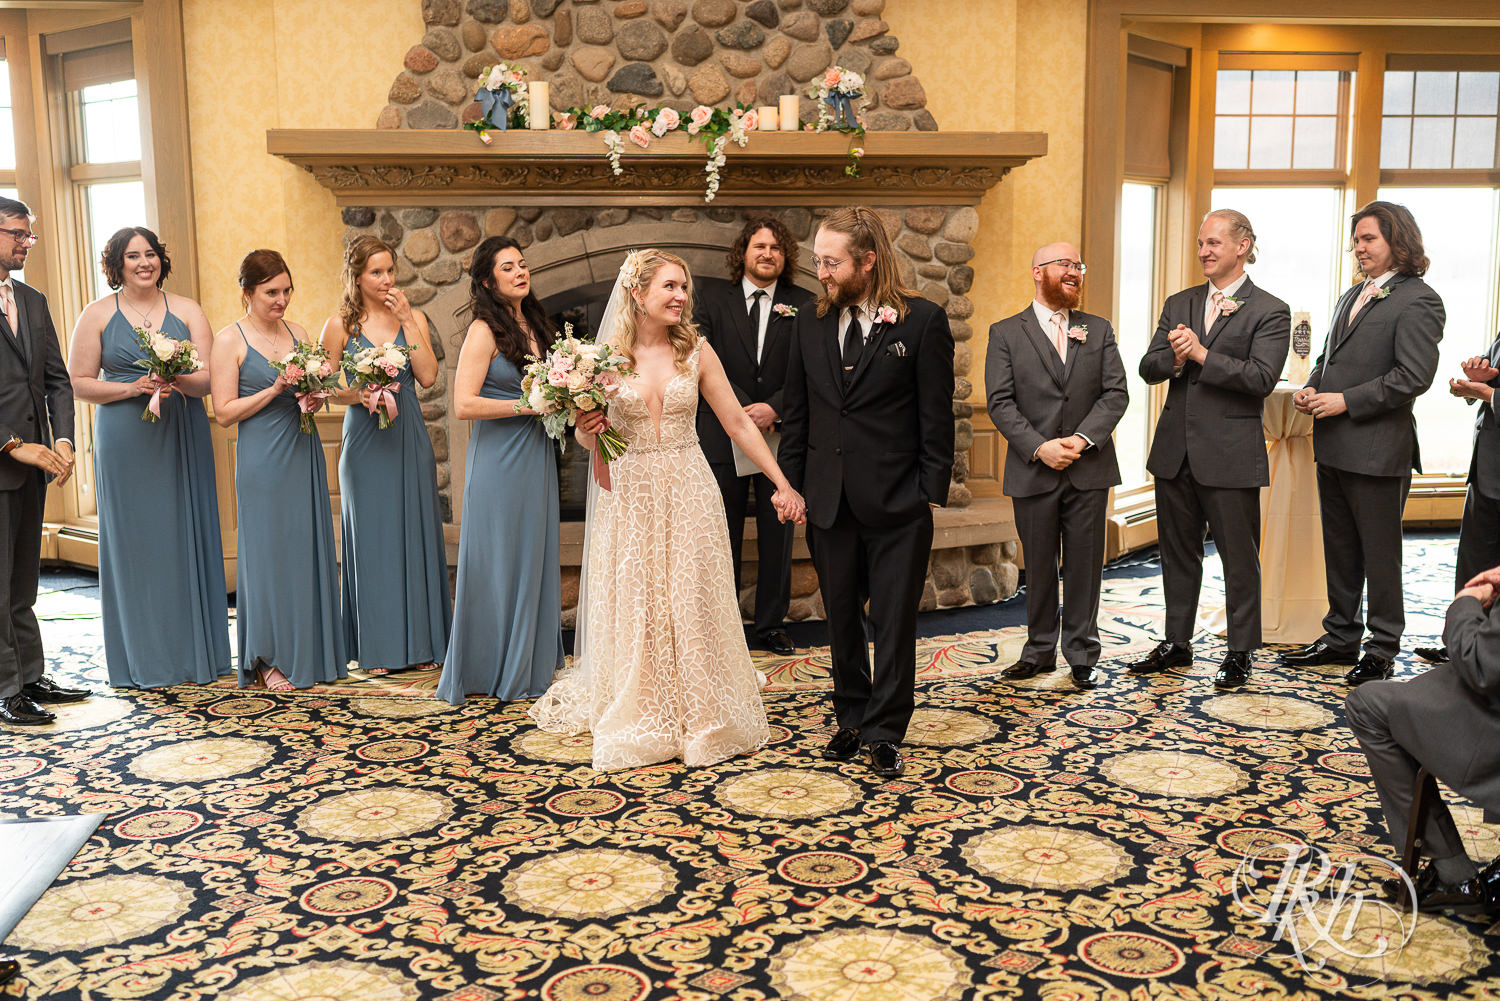 Indoor wedding ceremony takes place at Rush Creek Golf Club in Maple Grove, Minnesota.